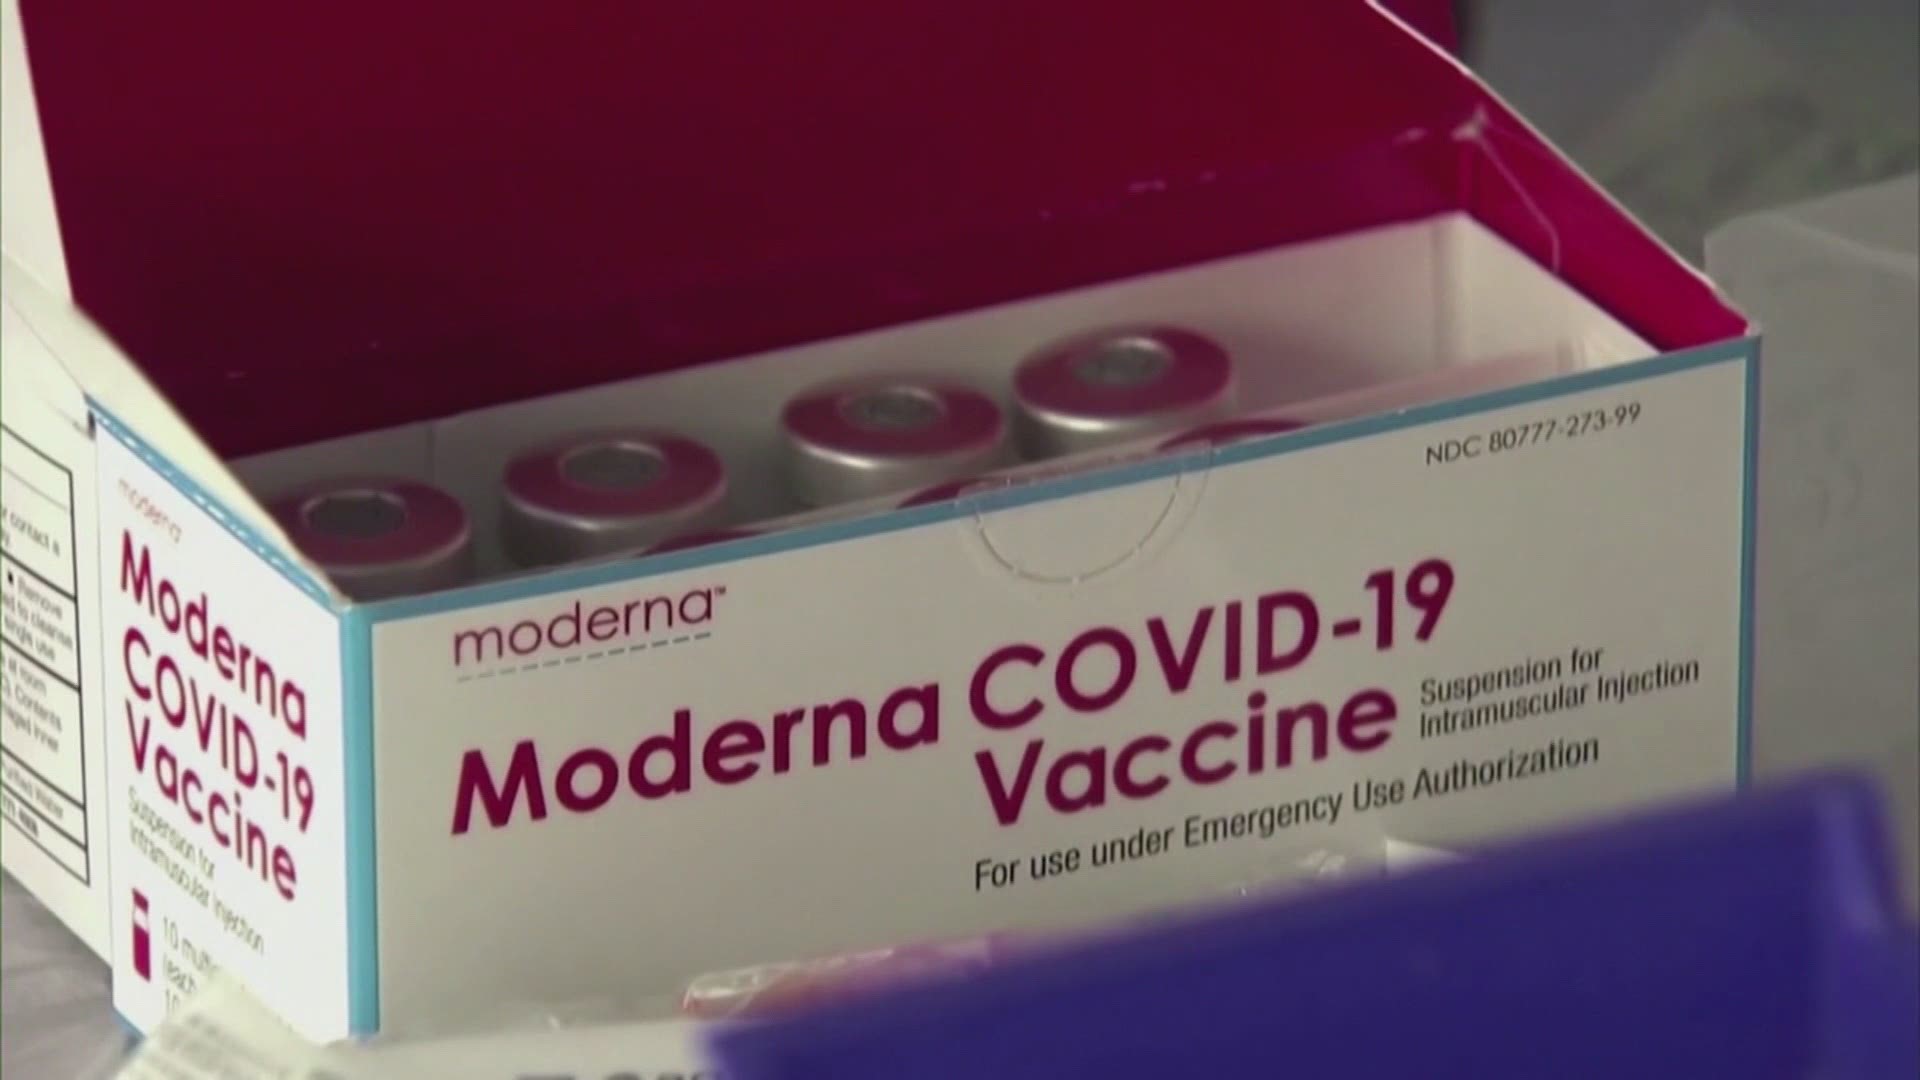 An infectious disease expert is advising not to take over-the-counter pain relievers like acetaminophen or ibuprofen before getting the COVID-19 vaccine.